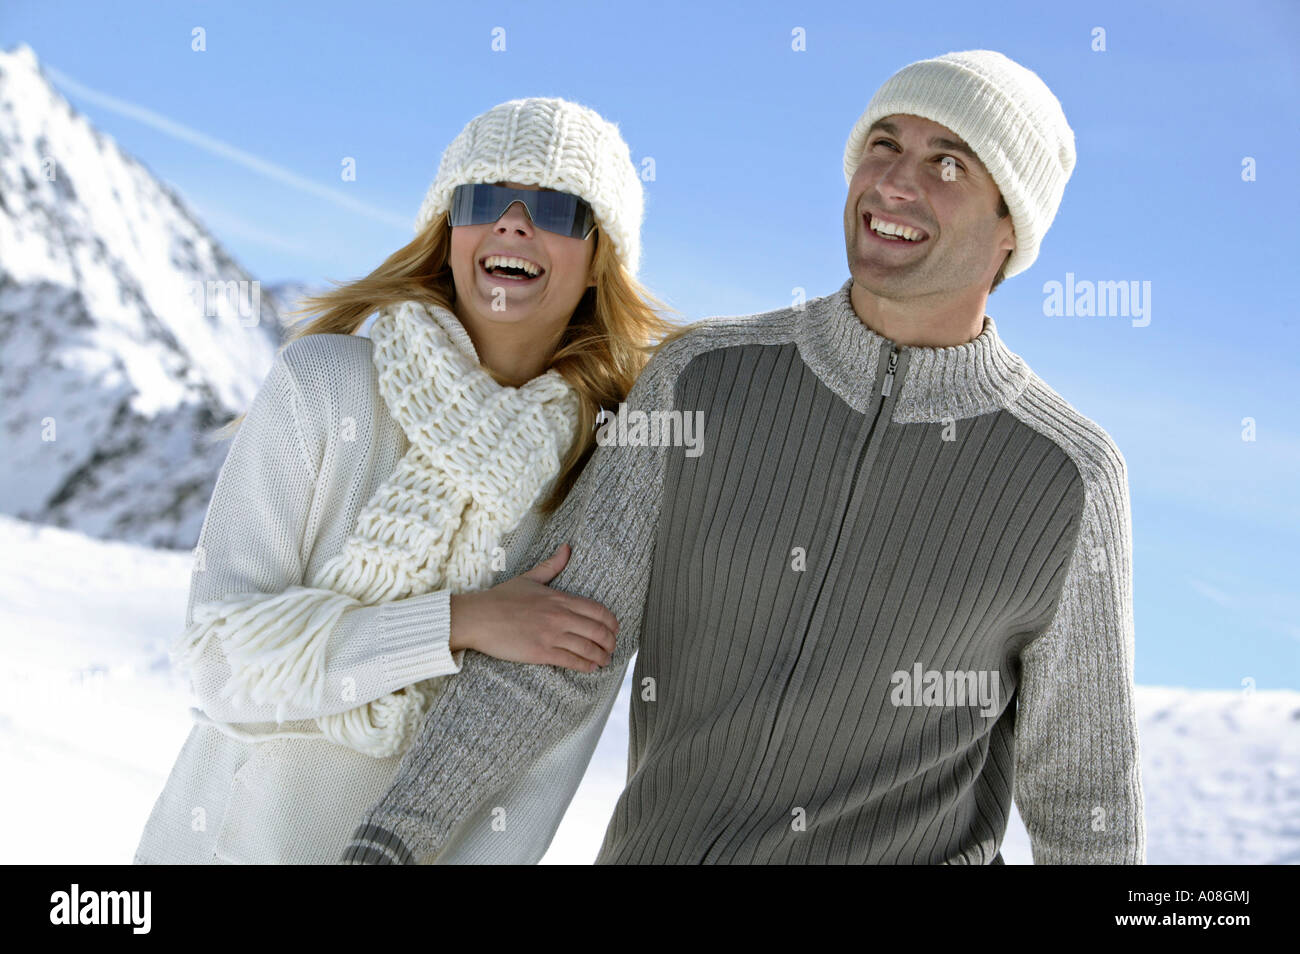 Junges Paar bei einem Winterspaziergang, young couple walking in winter landscape Stock Photo